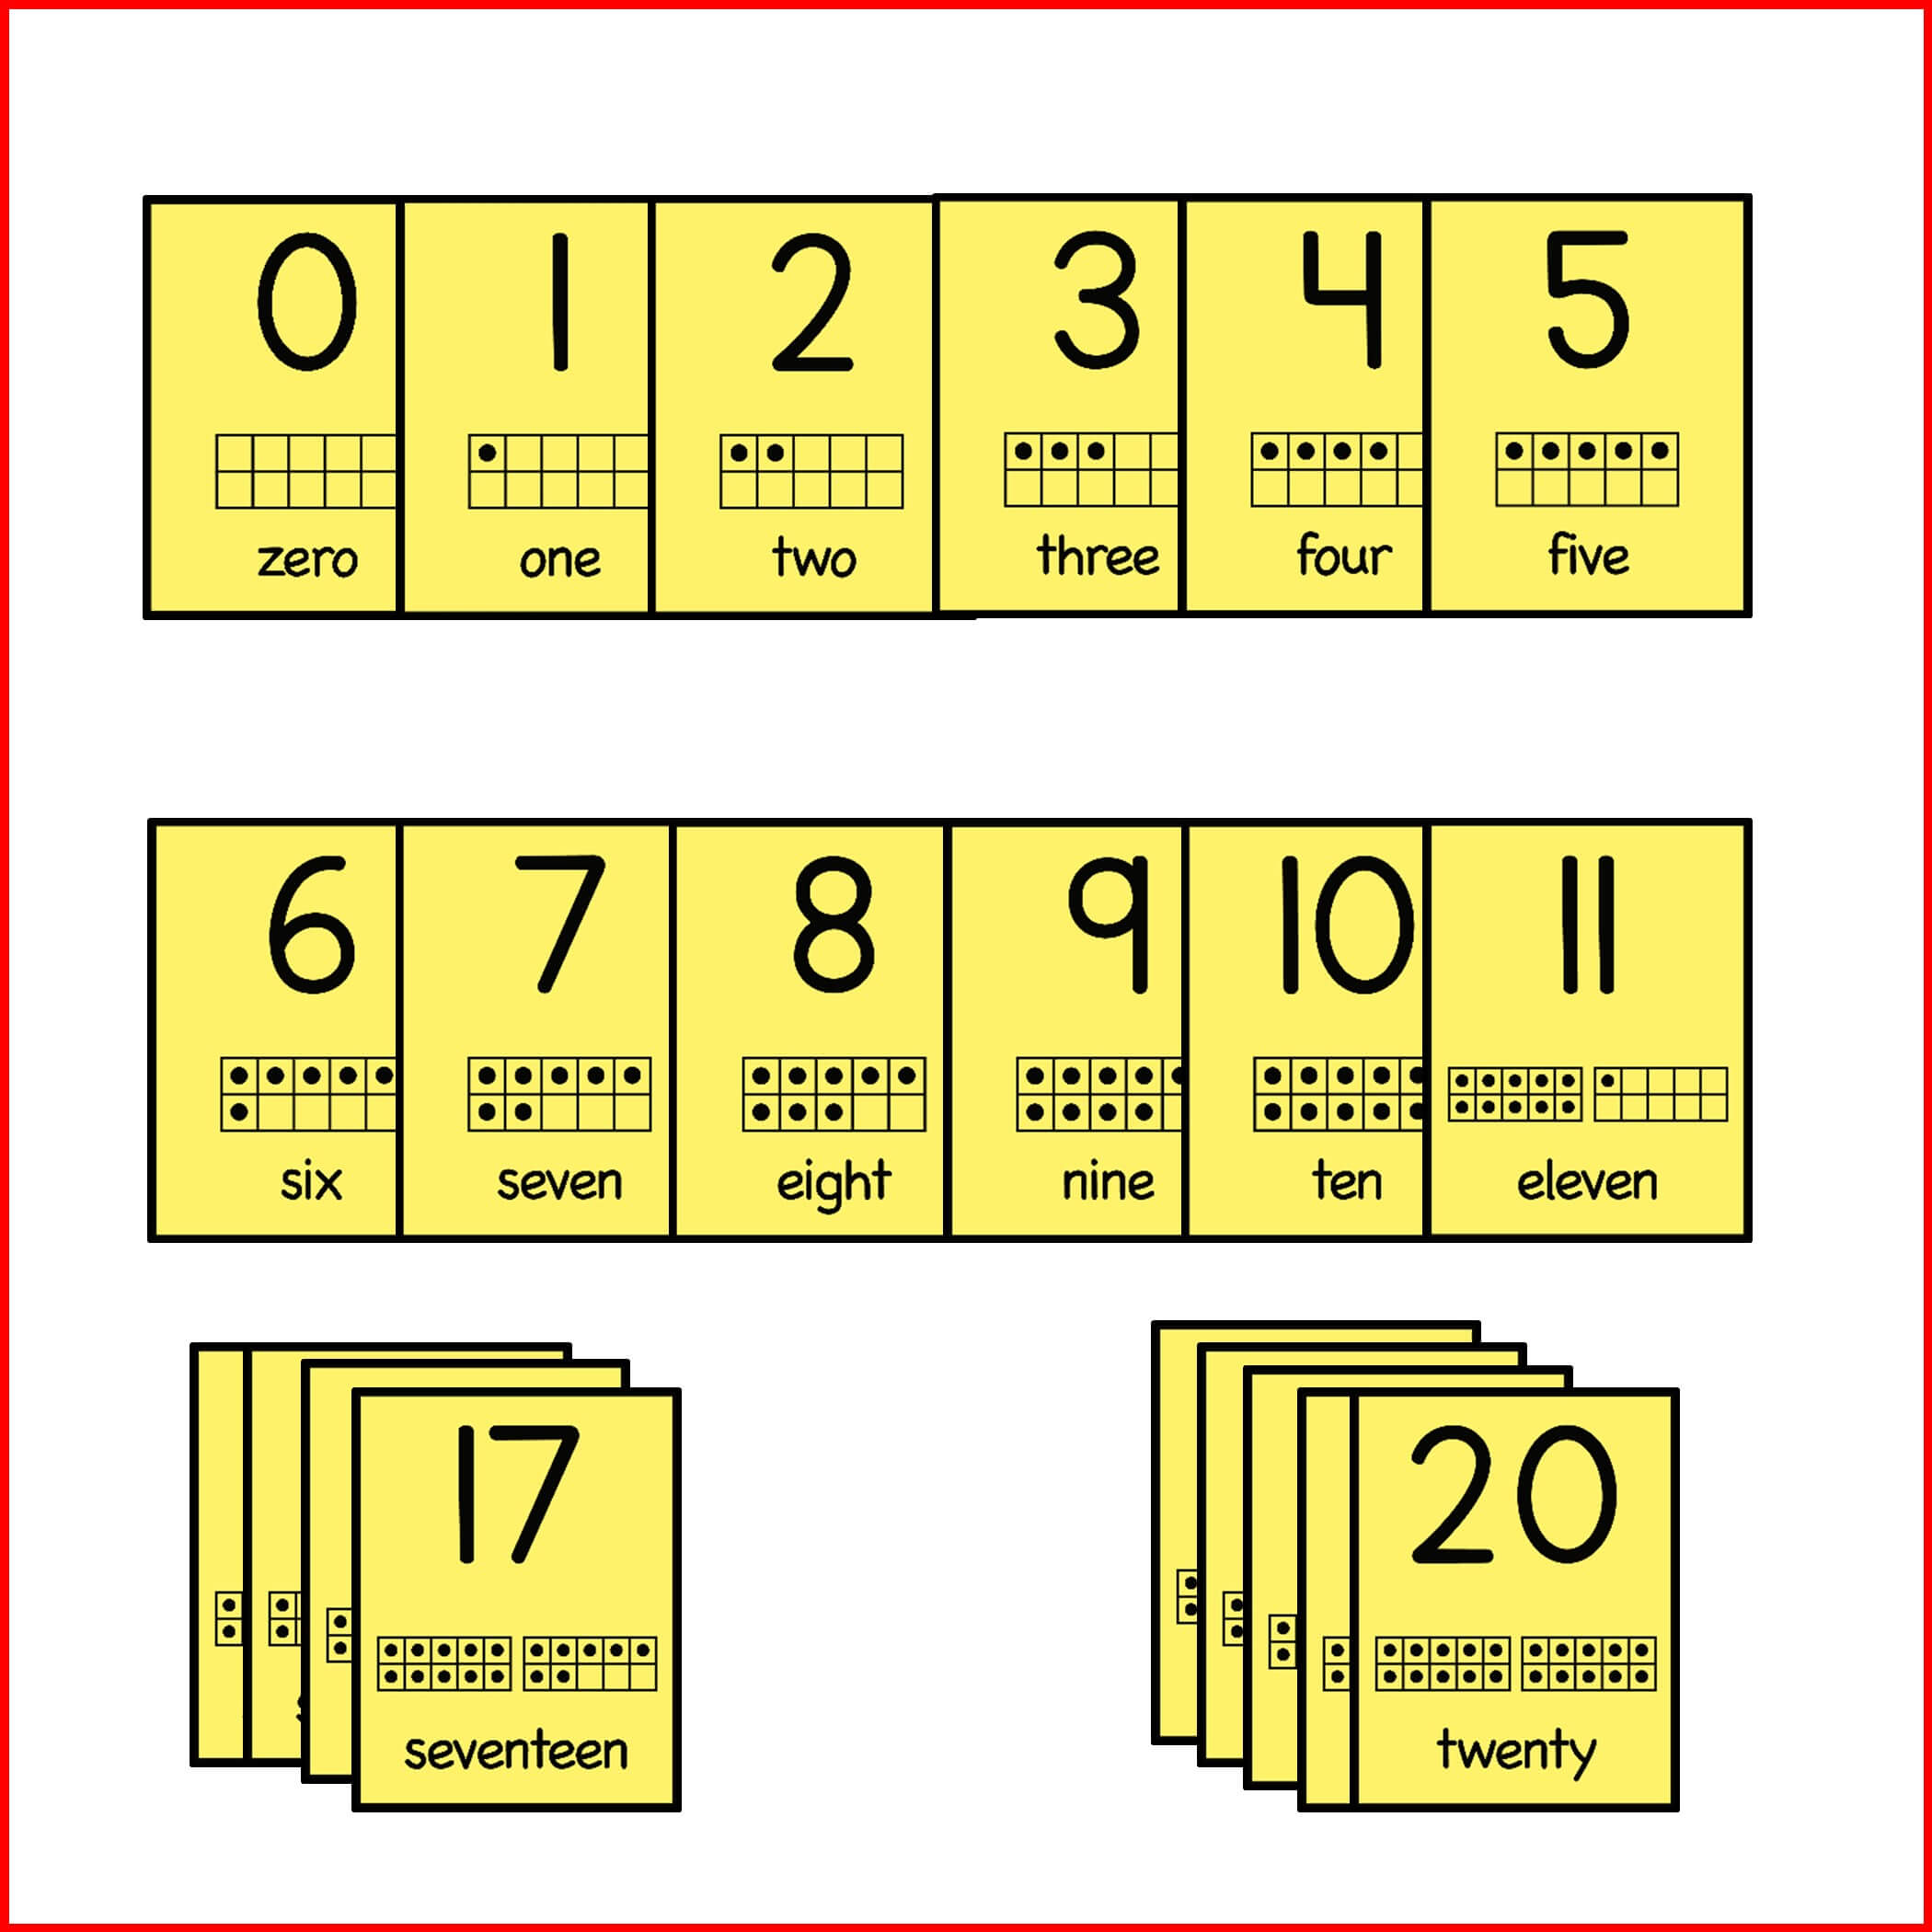 Numeral, Word, Ten Frame Cards